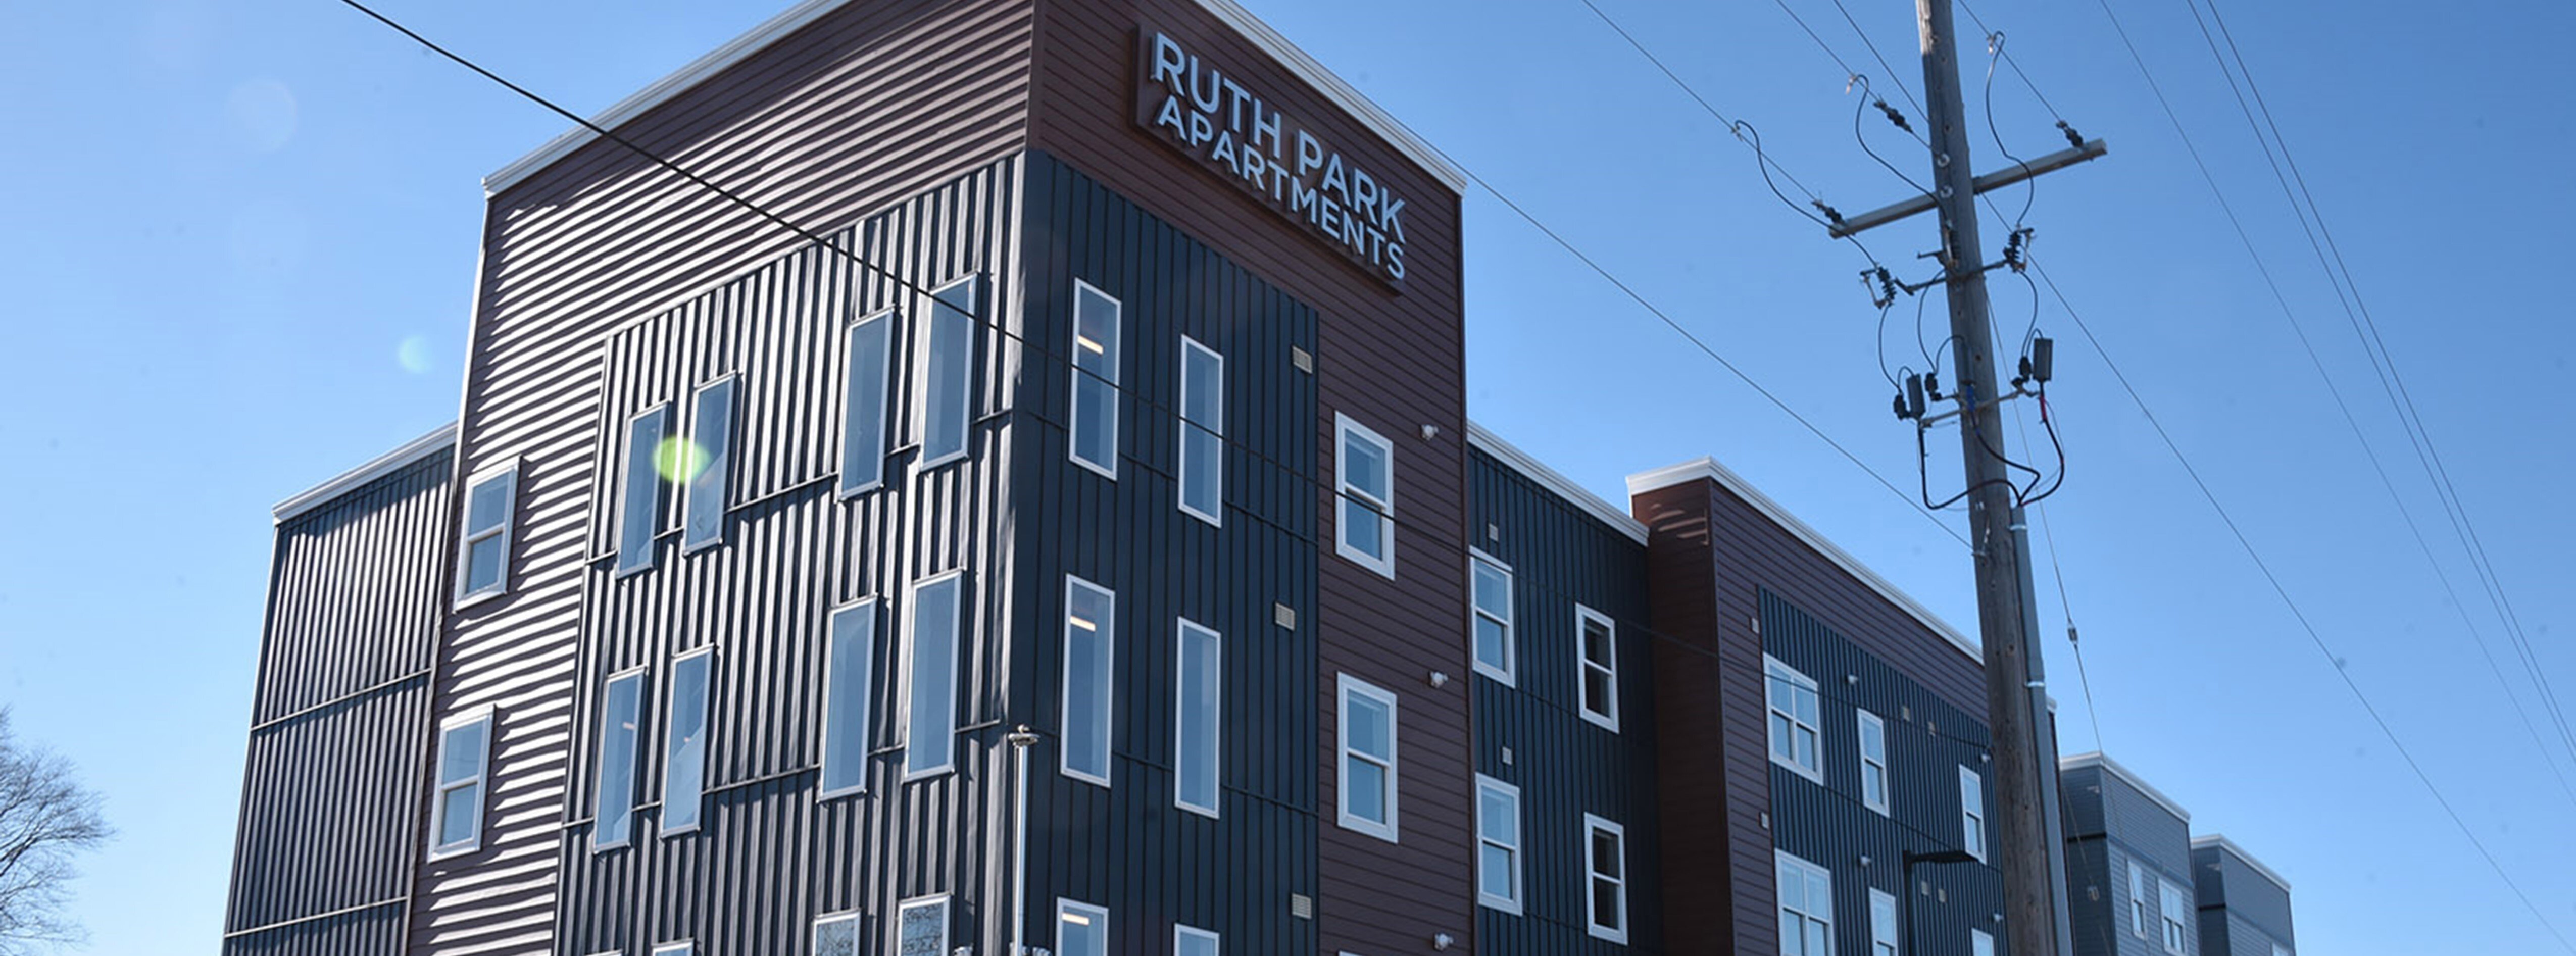 Ruth Park Apartments in Traverse City will offer 58 affordable apartments. 